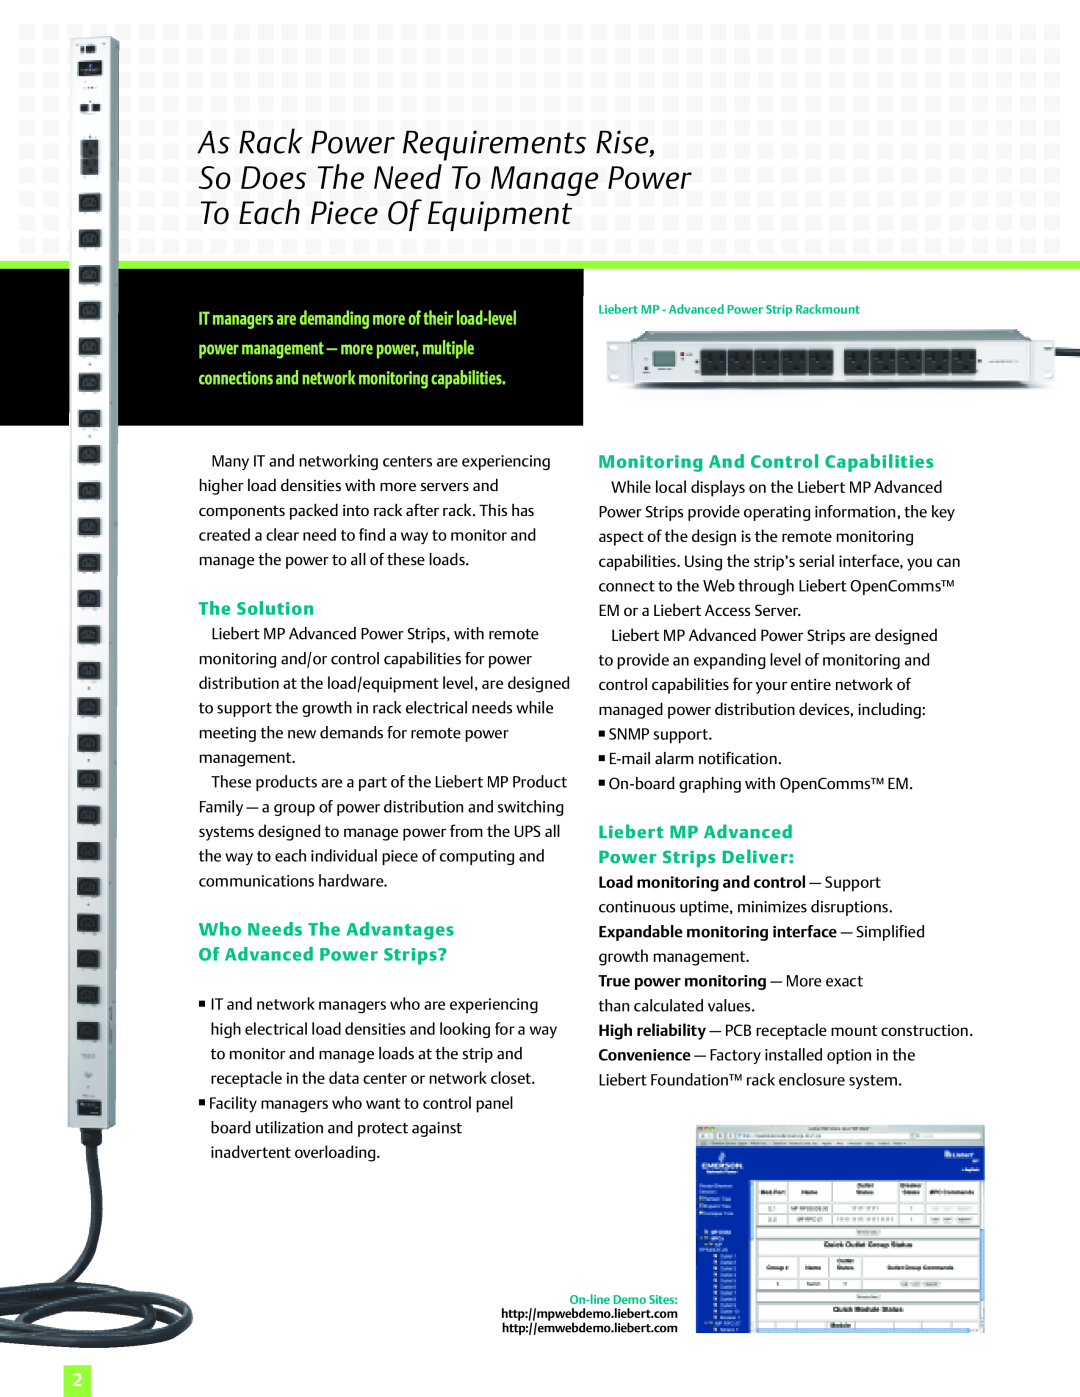 Emerson AC Power System manual To Each Piece Of Equipment, The Solution, Who Needs The Advantages Of Advanced Power Strips? 